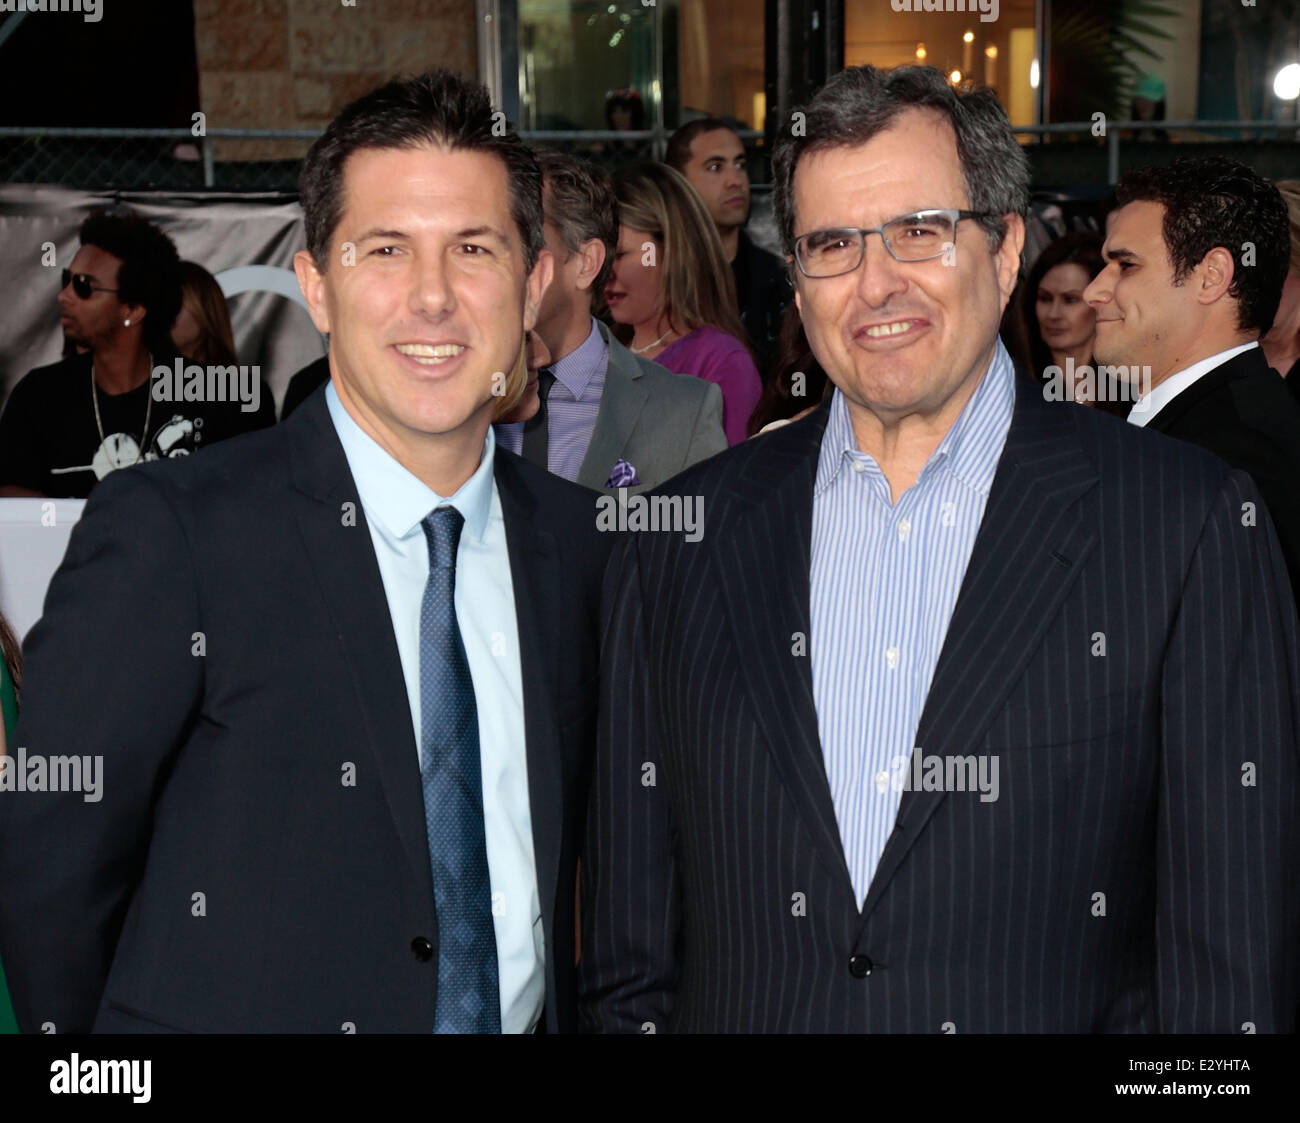 Celebrities attend Los Angeles premiere of 'Oblivion' at The Dolby Theatre.  Featuring: Dylan Clark,Peter Chernin Where: Hollywood, California, United States When: 10 Apr 2013 Stock Photo